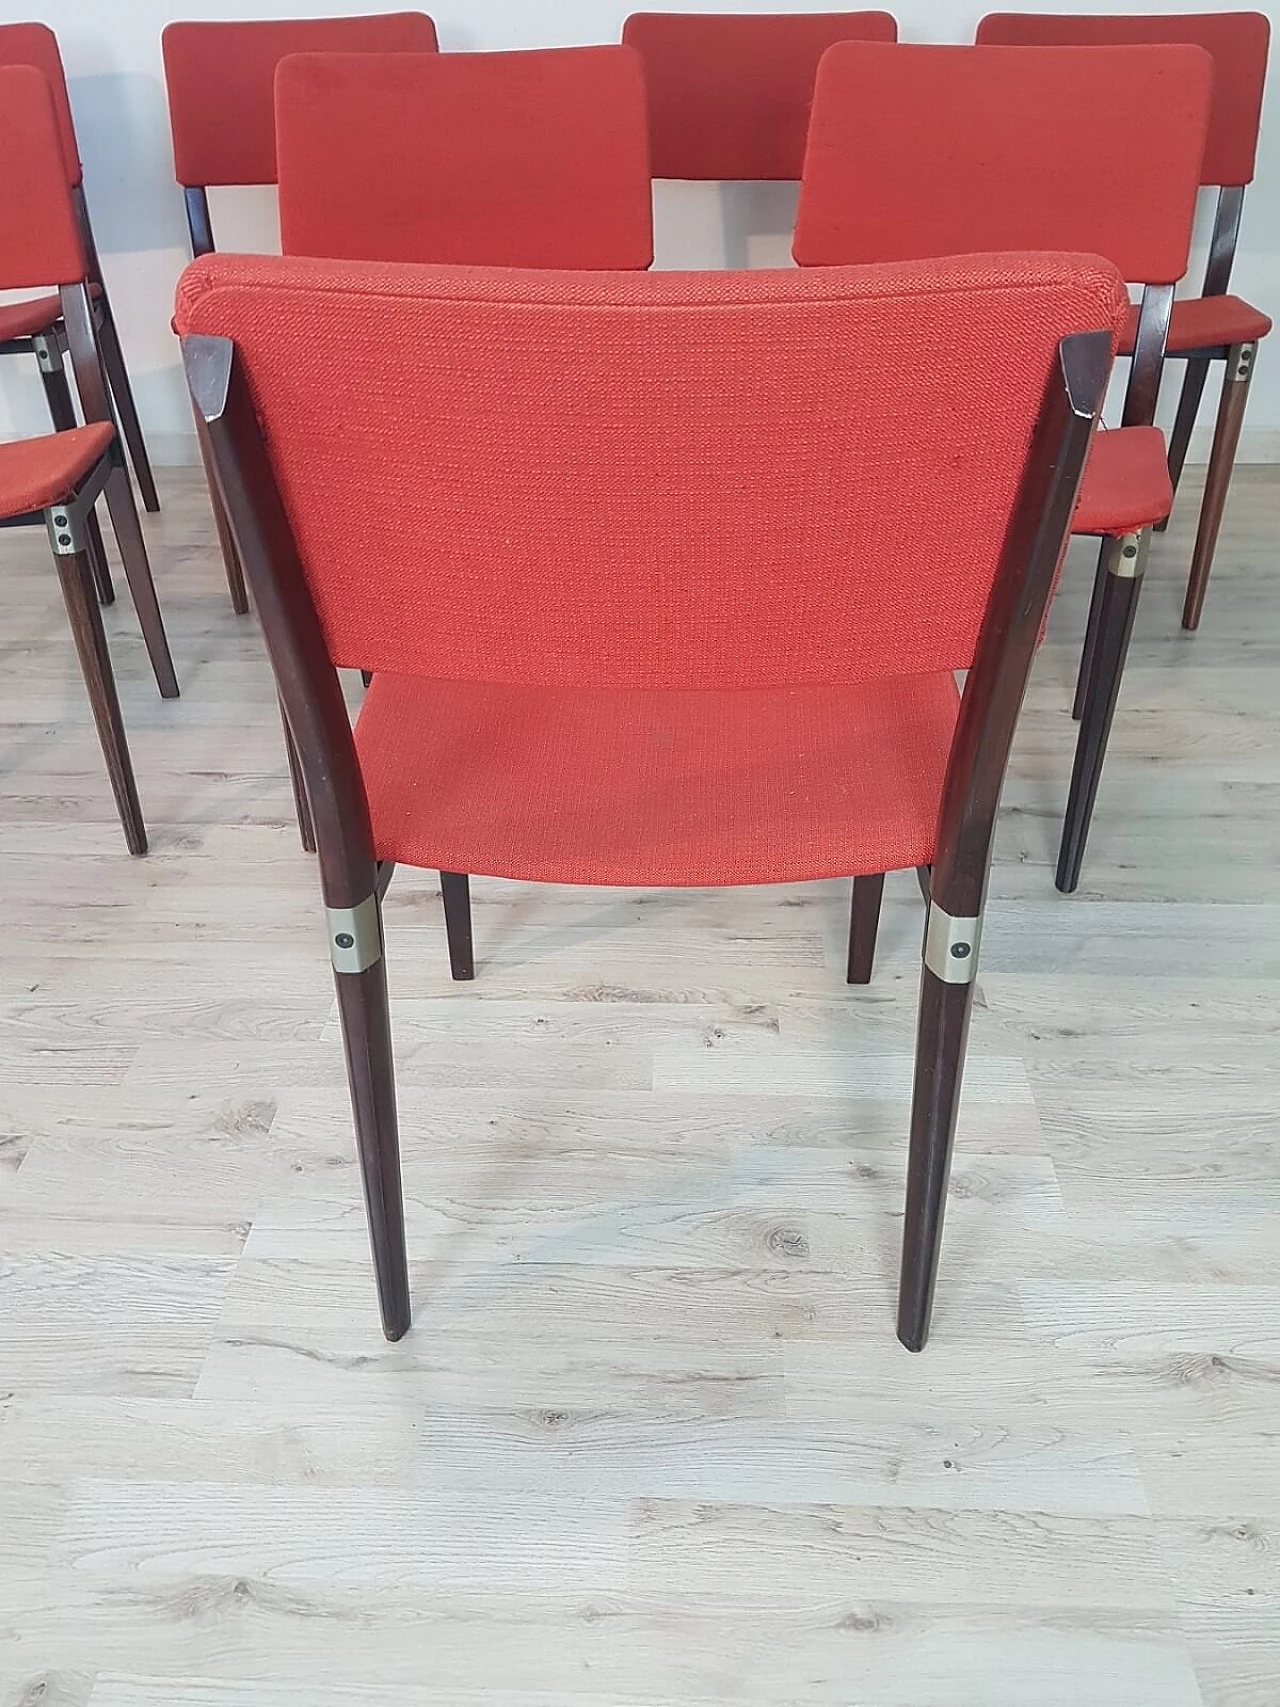 Set of 8 chairs "S82" by Eugenio Gerli for Tecno 8